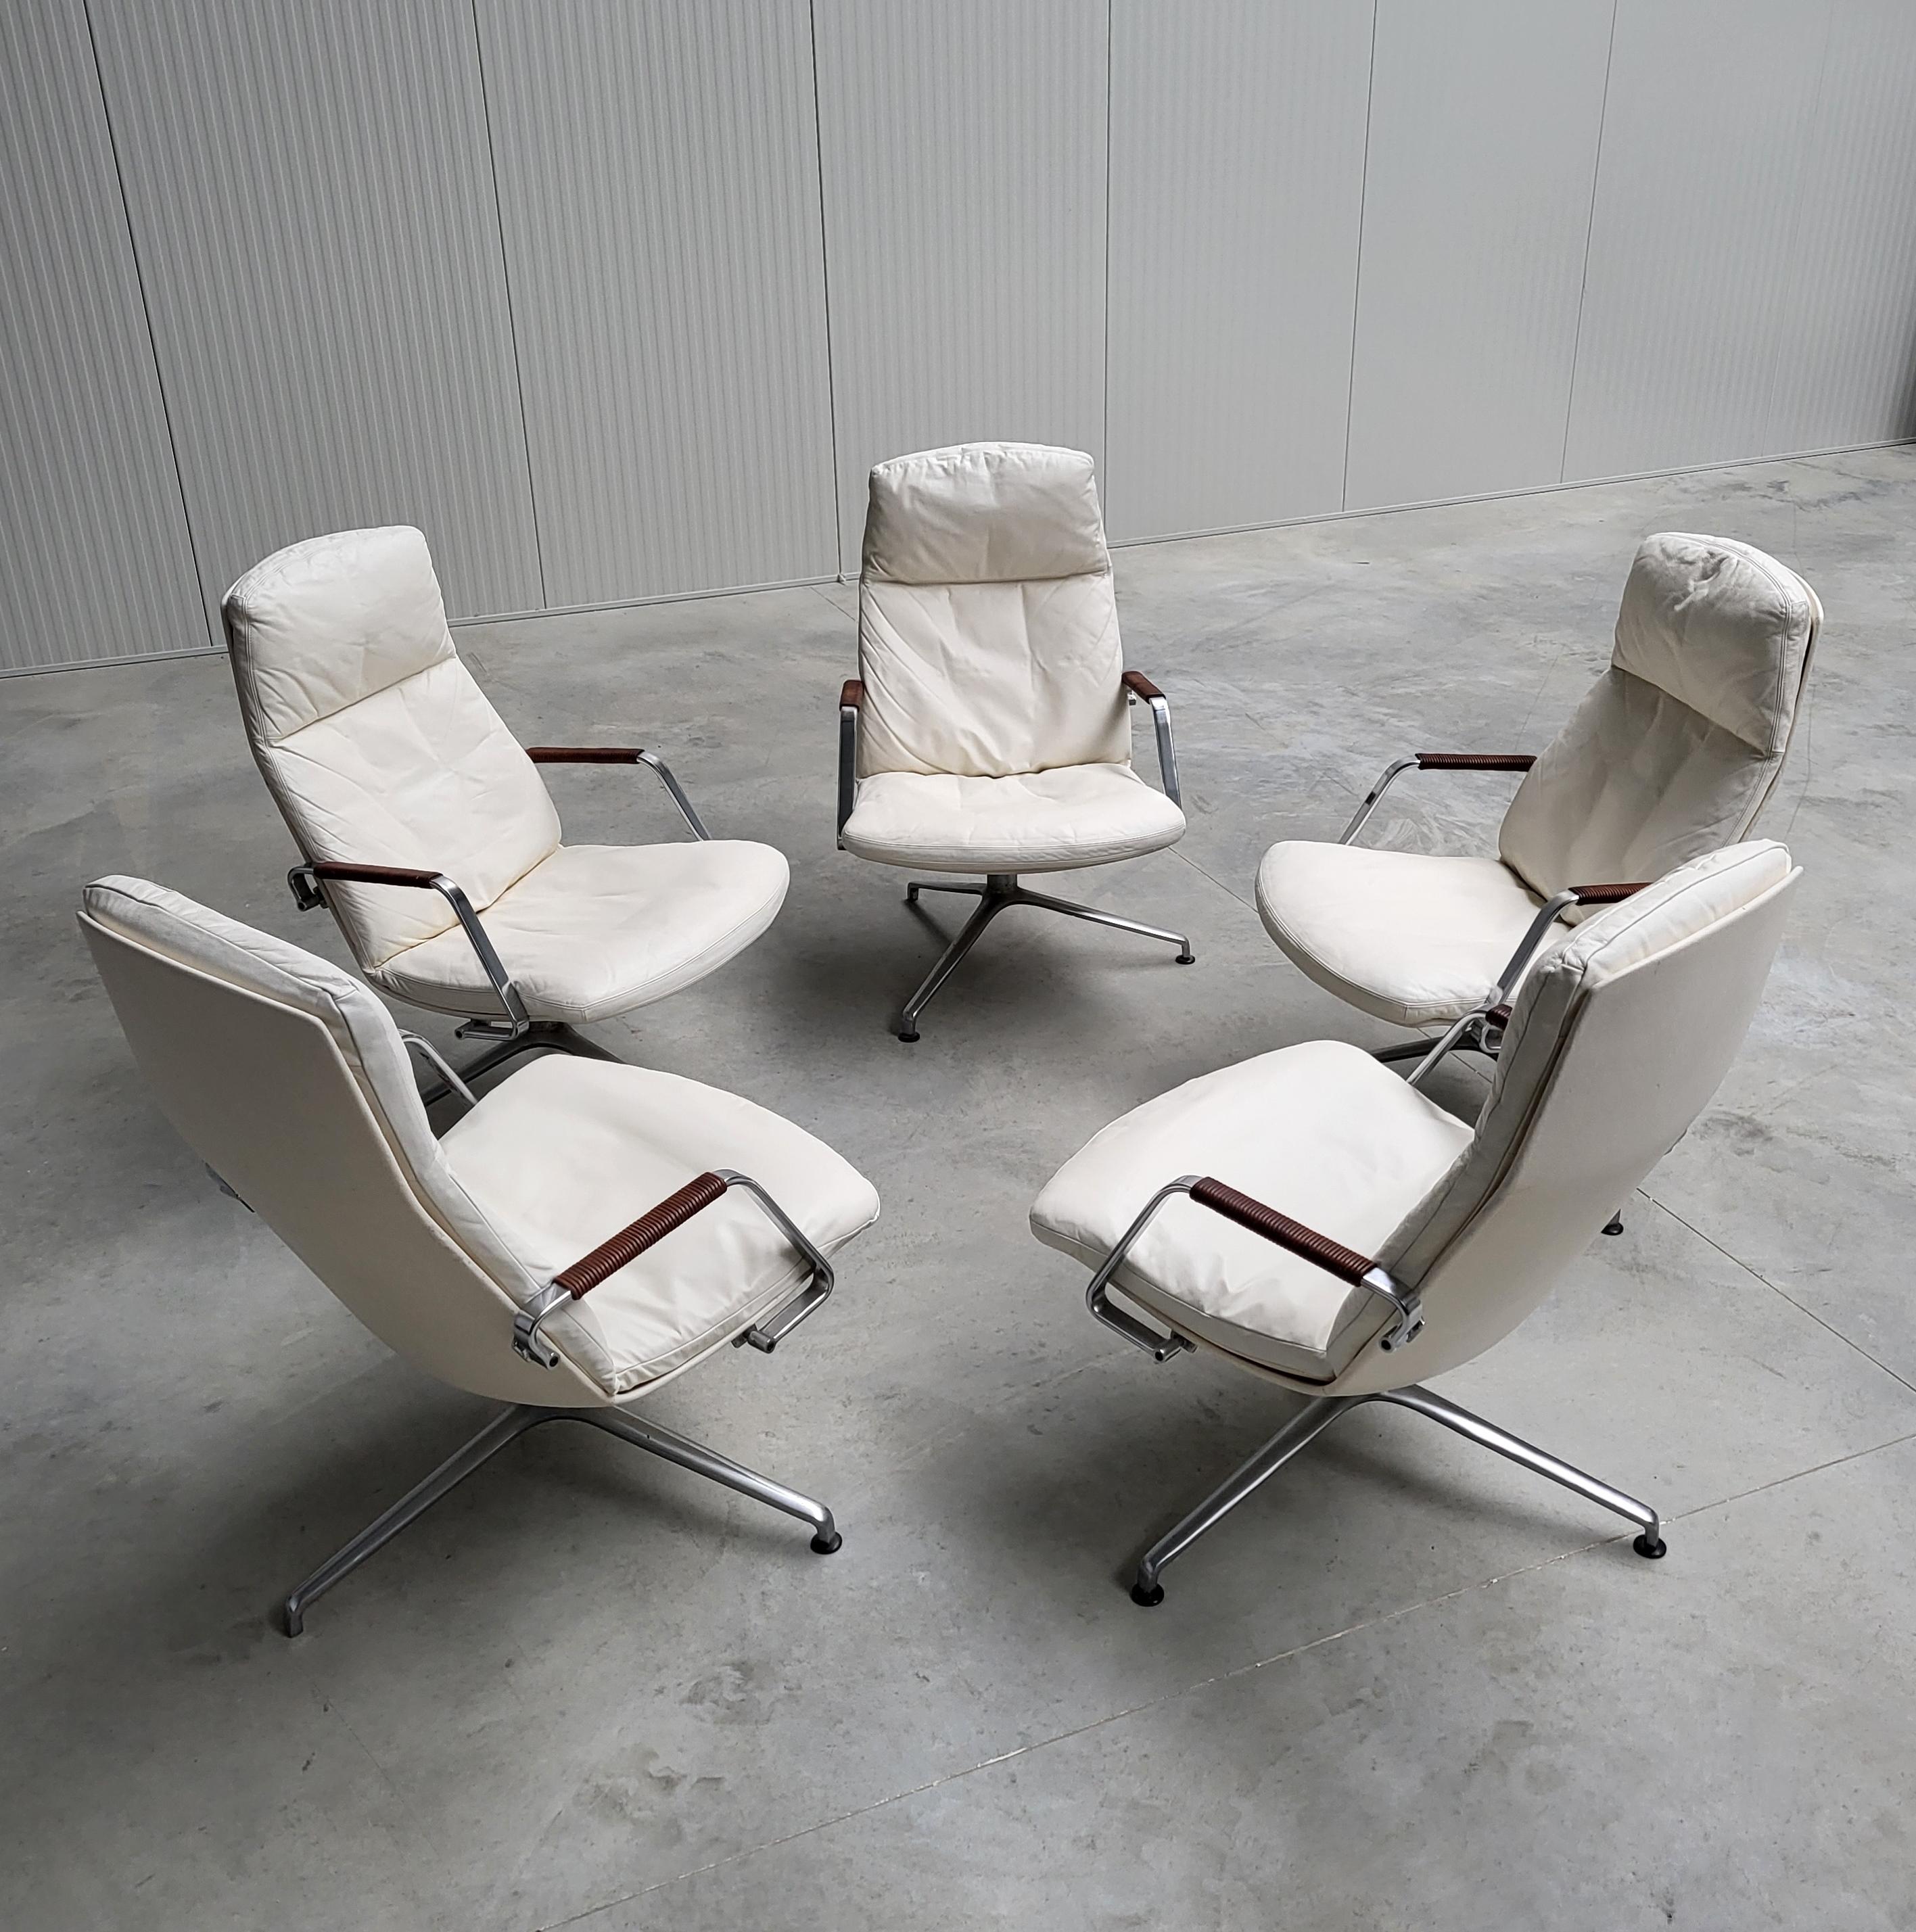 This fine example of the FK86 lounge chair was designed by Jorgen Kastholm & Preben Fabricius in the early 60s and produced by Kill International in the late 1960s. 

This edition is a very early edition from the first production years.

The chair